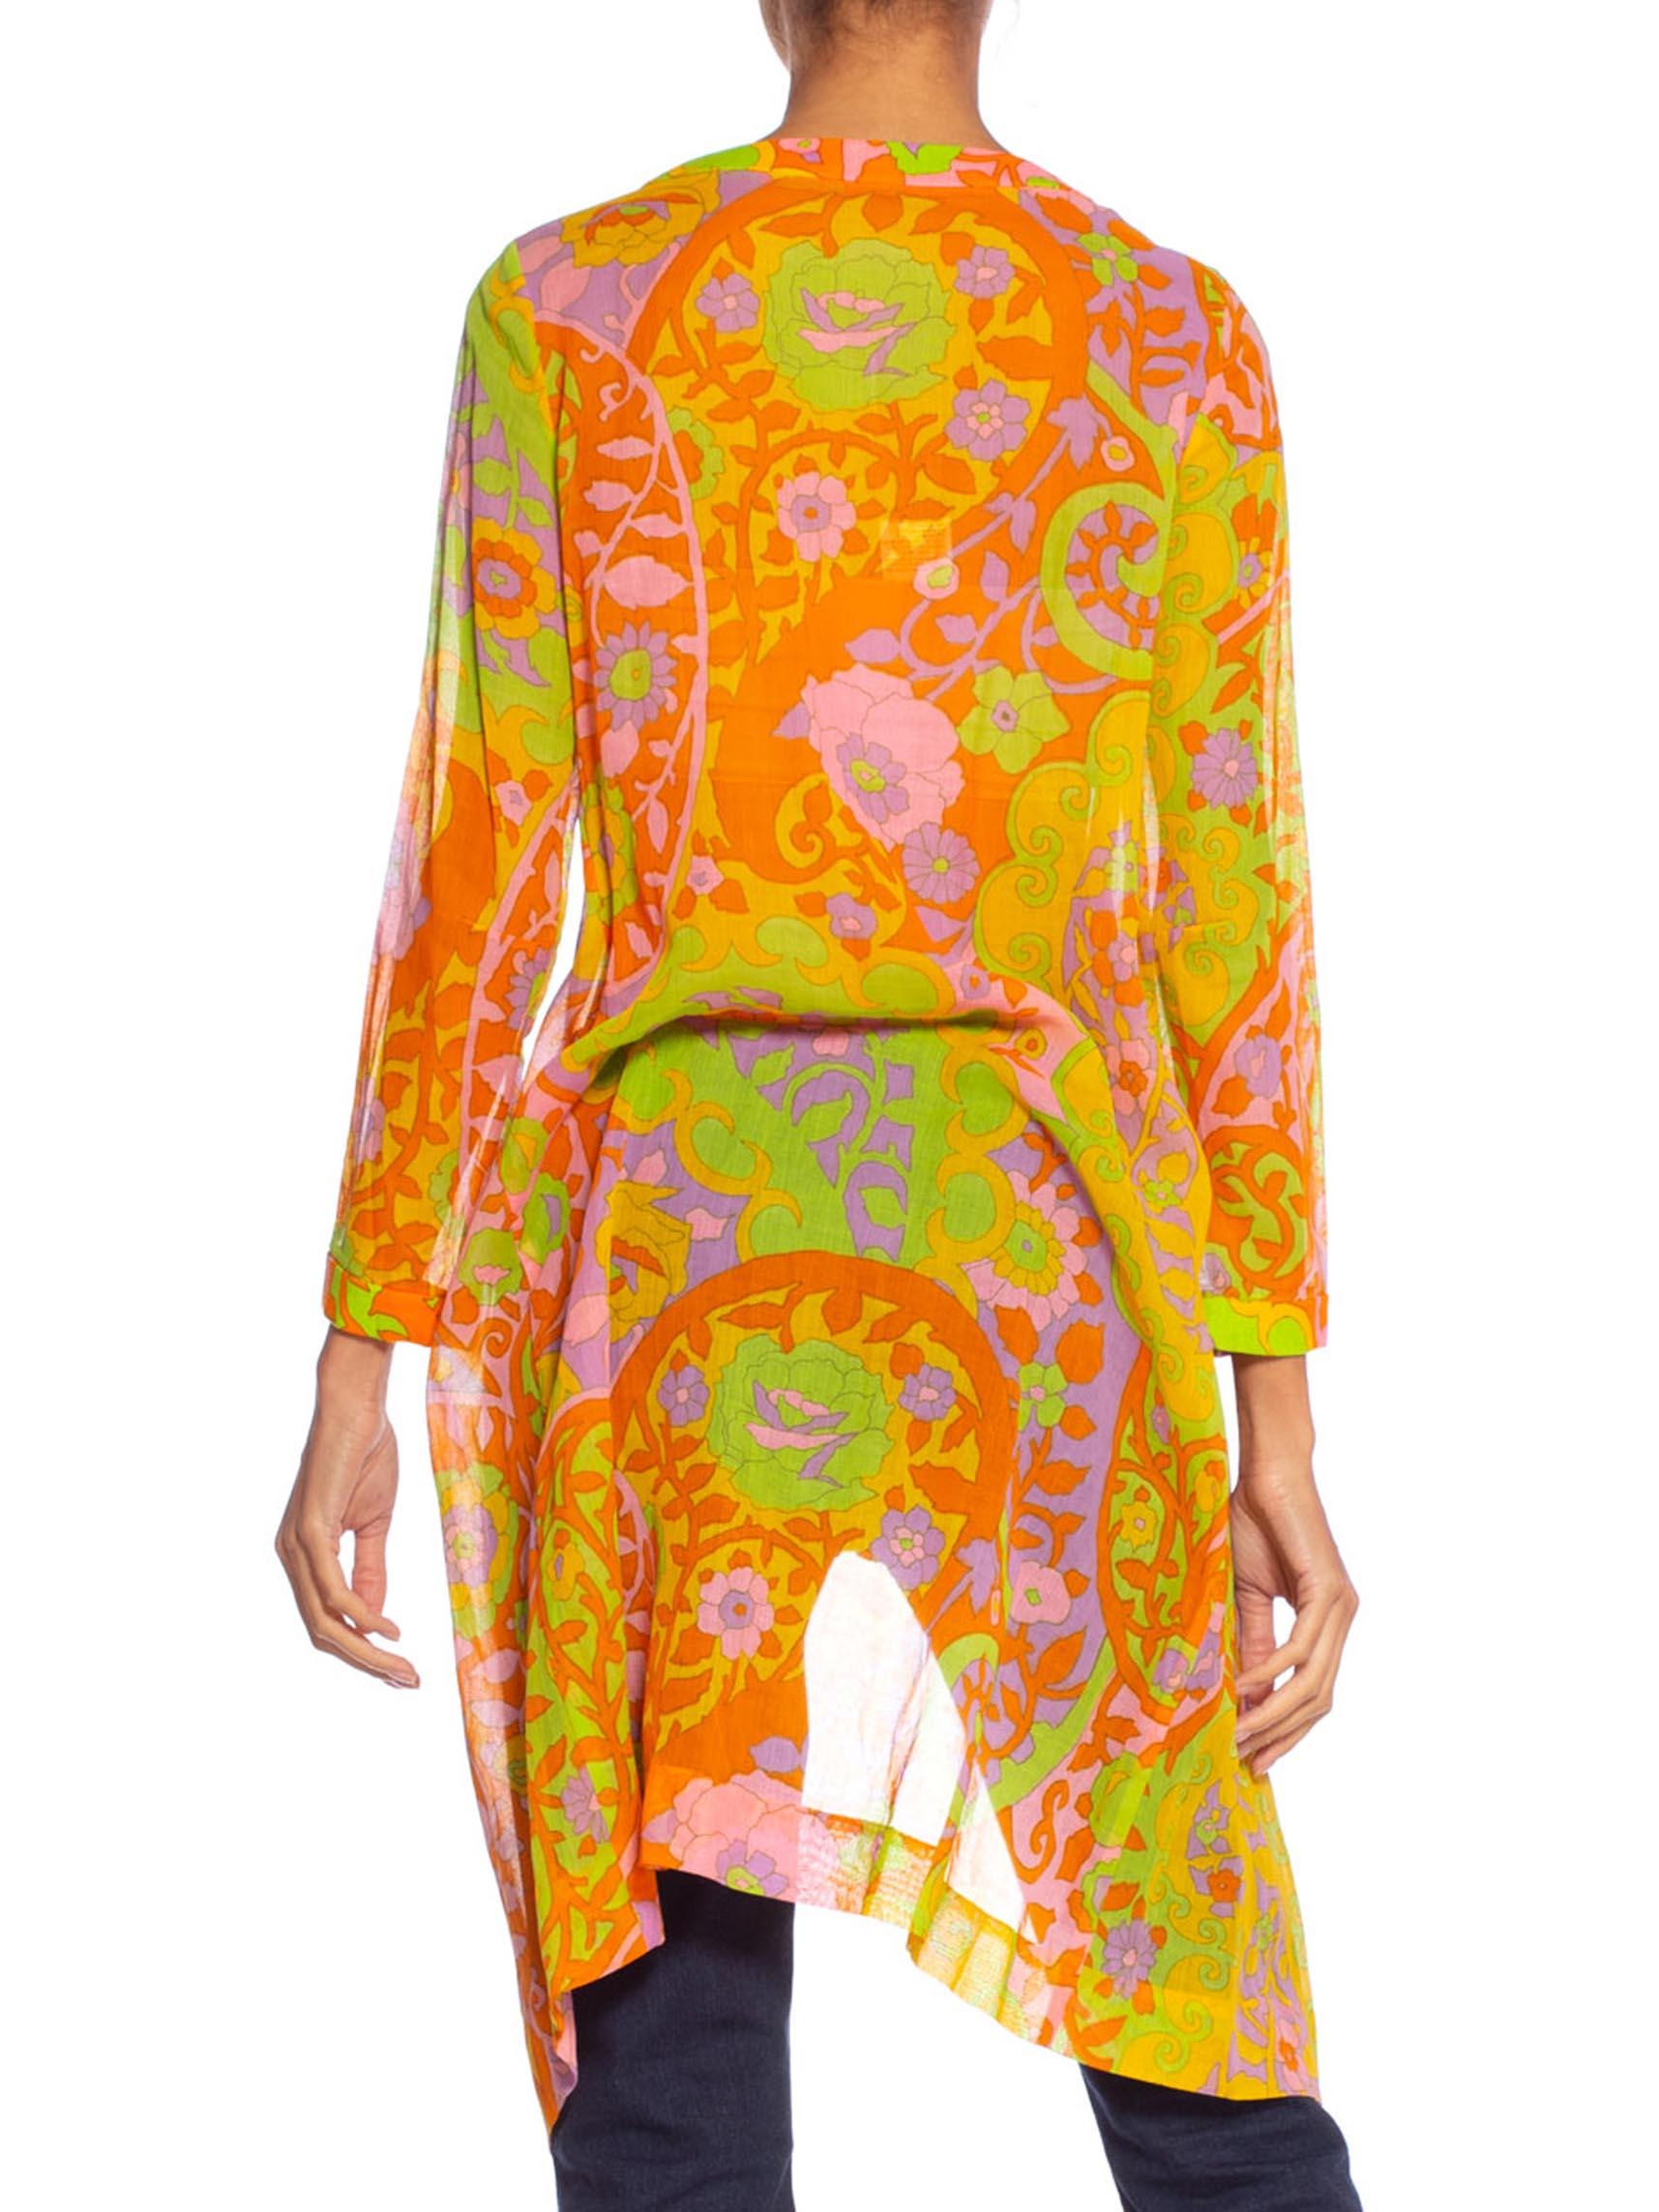 1960S Lime Green & Orange Cotton Voile Mod Psychedelic Floral Tunic Jacket Top 5